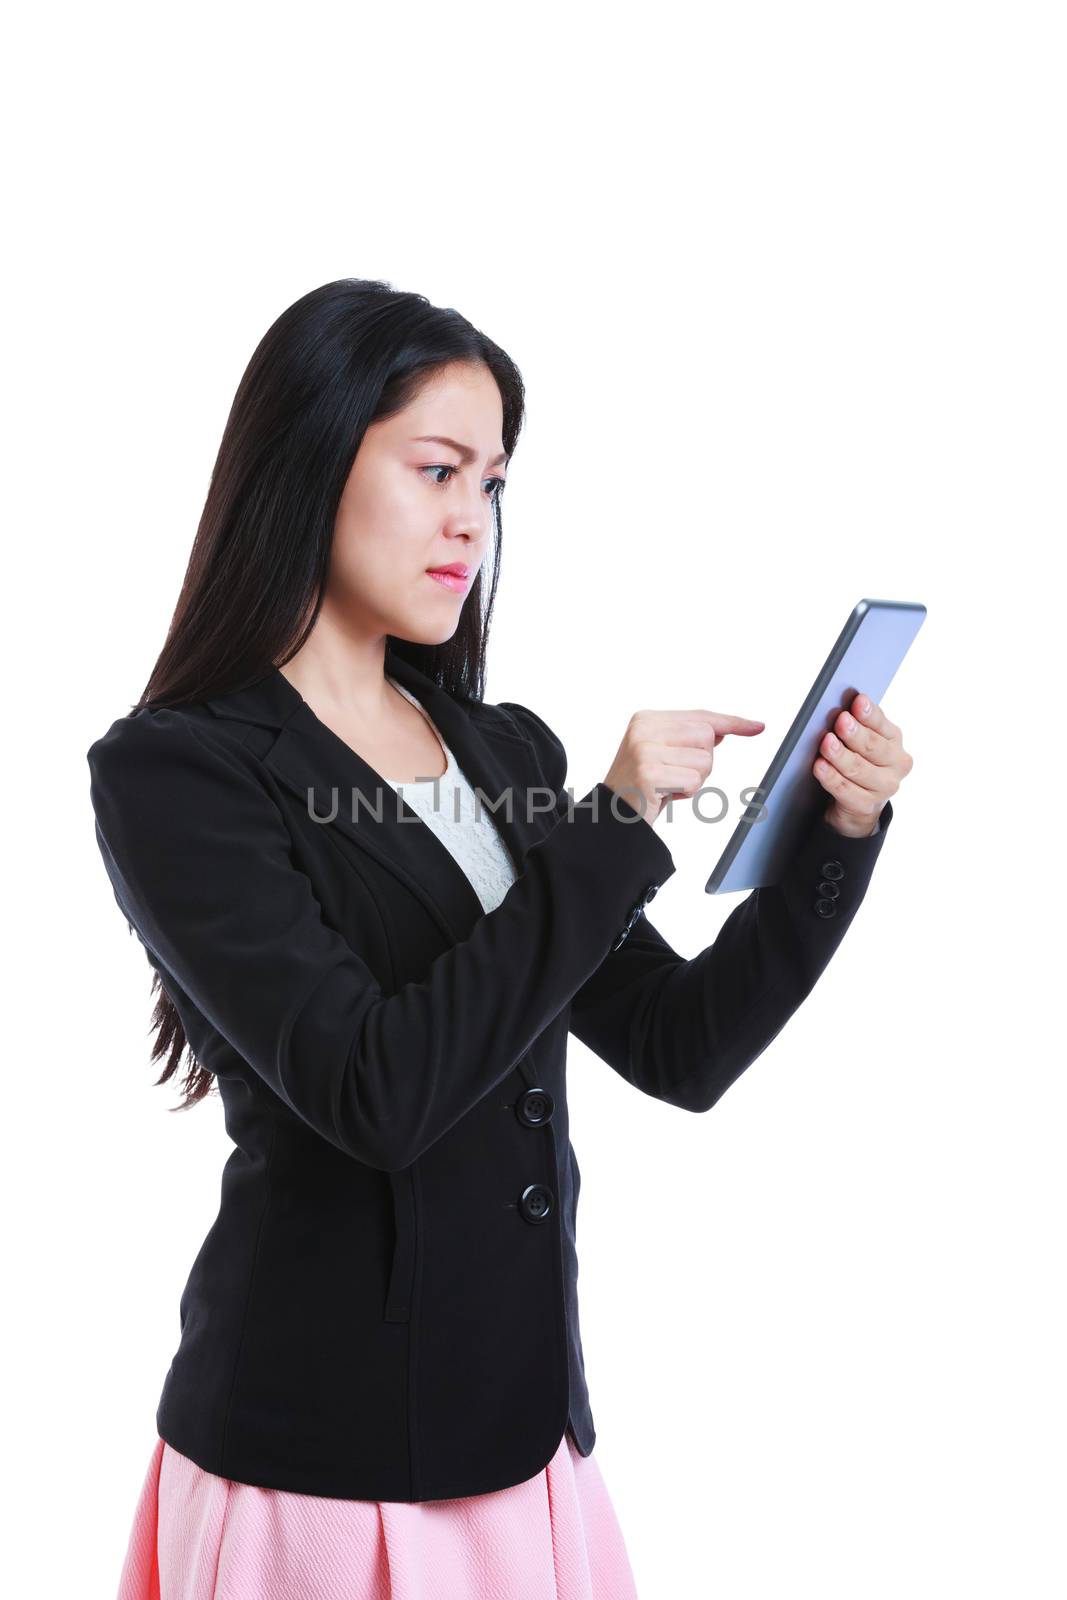 Young asian businesswoman is in an angry mood with her digital tablet. Negative human face expressions. Isolated on white background. Studio shot.